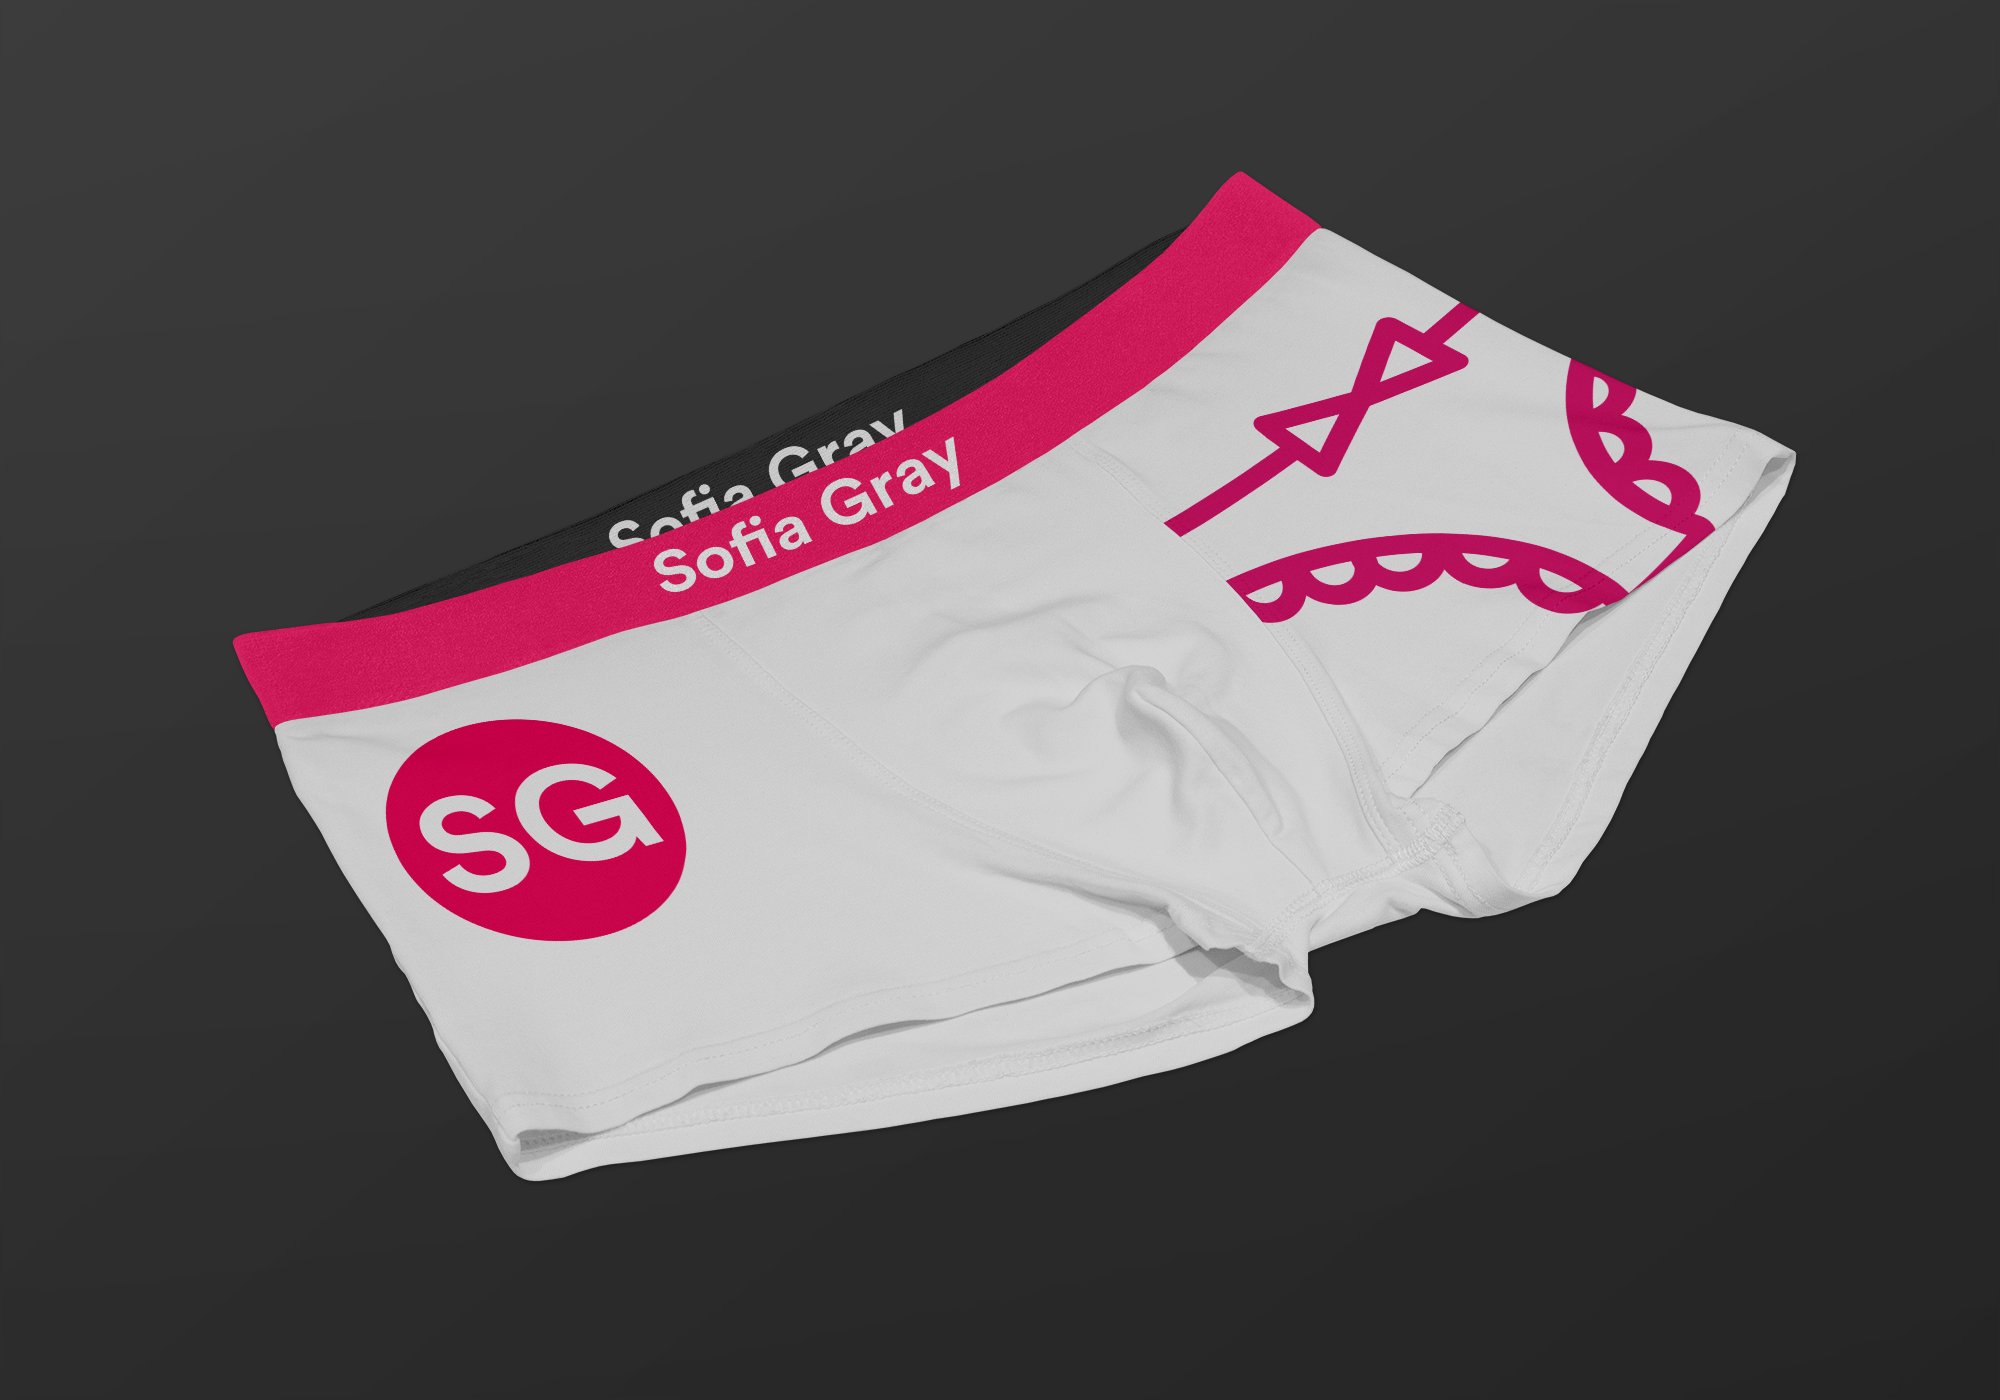 Sofia Gray on Twitter: 'Make $$ selling used underwear on Sofia Gray. Men  and women are making thousands per month selling their panties, and you  could, too! Find out more about how